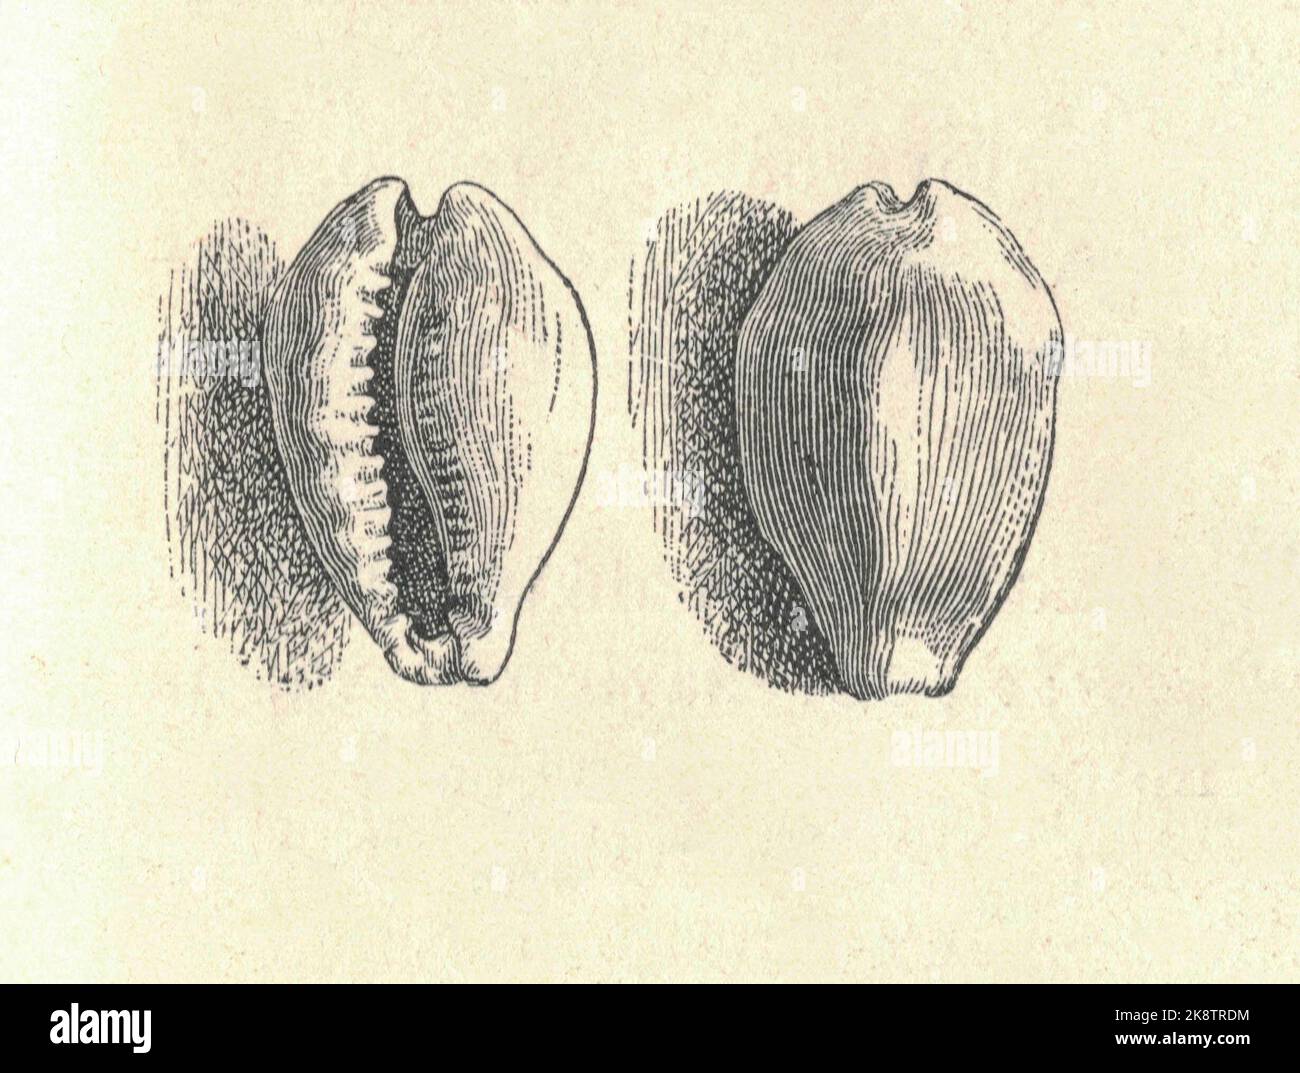 Antique engraved illustration of money cowry. Vintage illustration of Monetaria moneta. Old engraved picture. Book illustration published 1907. Monetaria moneta, common name the money cowry, is a species of small sea snail, a marine gastropod mollusk in the family Cypraeidae, the cowries. This species is called 'money cowry' because the shells were historically widely used in many Pacific and Indian Ocean countries as shell money before coinage was in common usage. It is a quite small cowry, up to 3 cm (1.2 in) and weighing roughly 0.04 oz (1.1 g), irregular and flattened, with very calloused Stock Photo